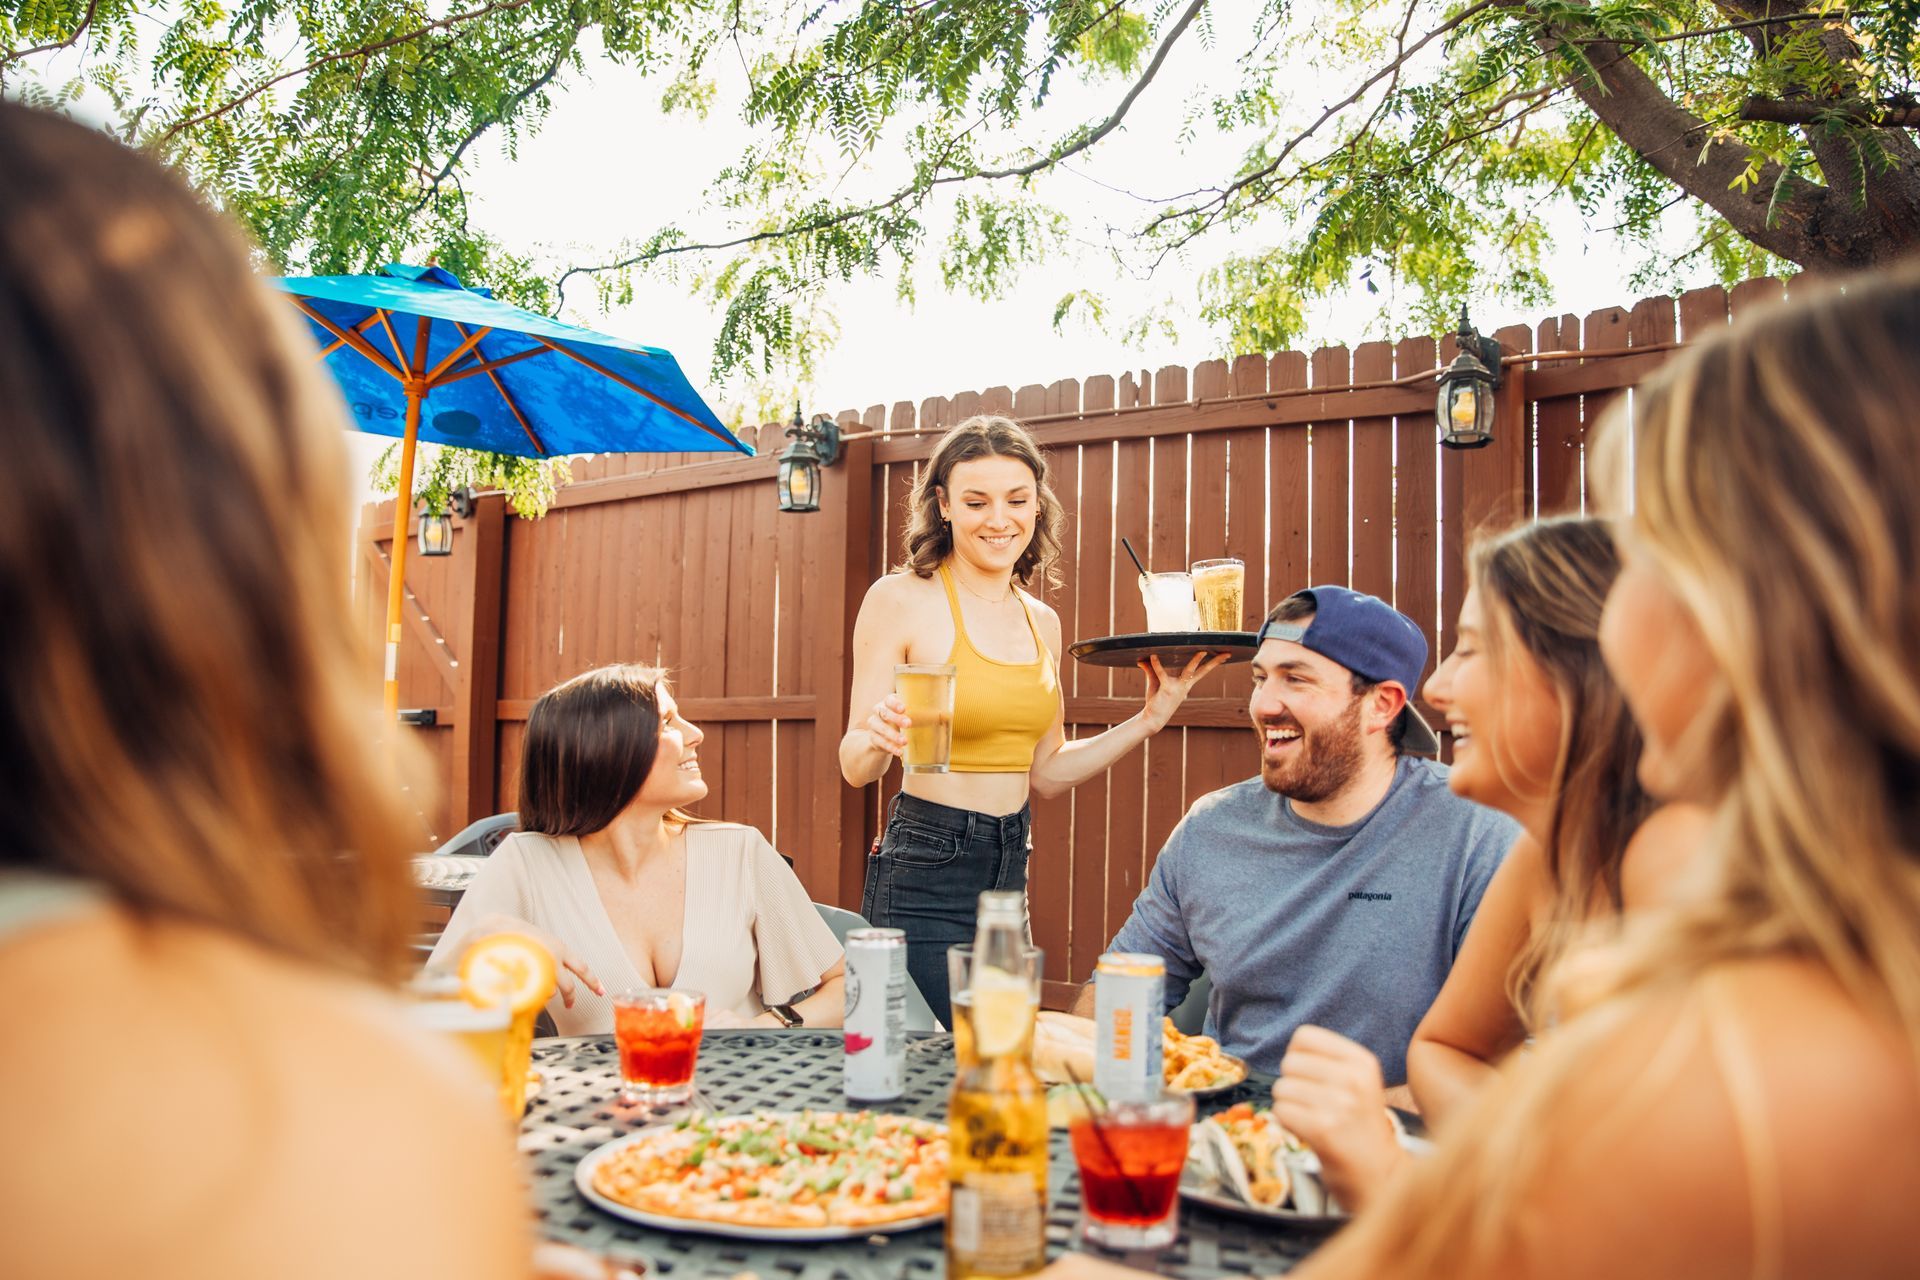 Dine Outside With Friends in the Spring at The Deuce Pub & Pit in Columbia, MO.